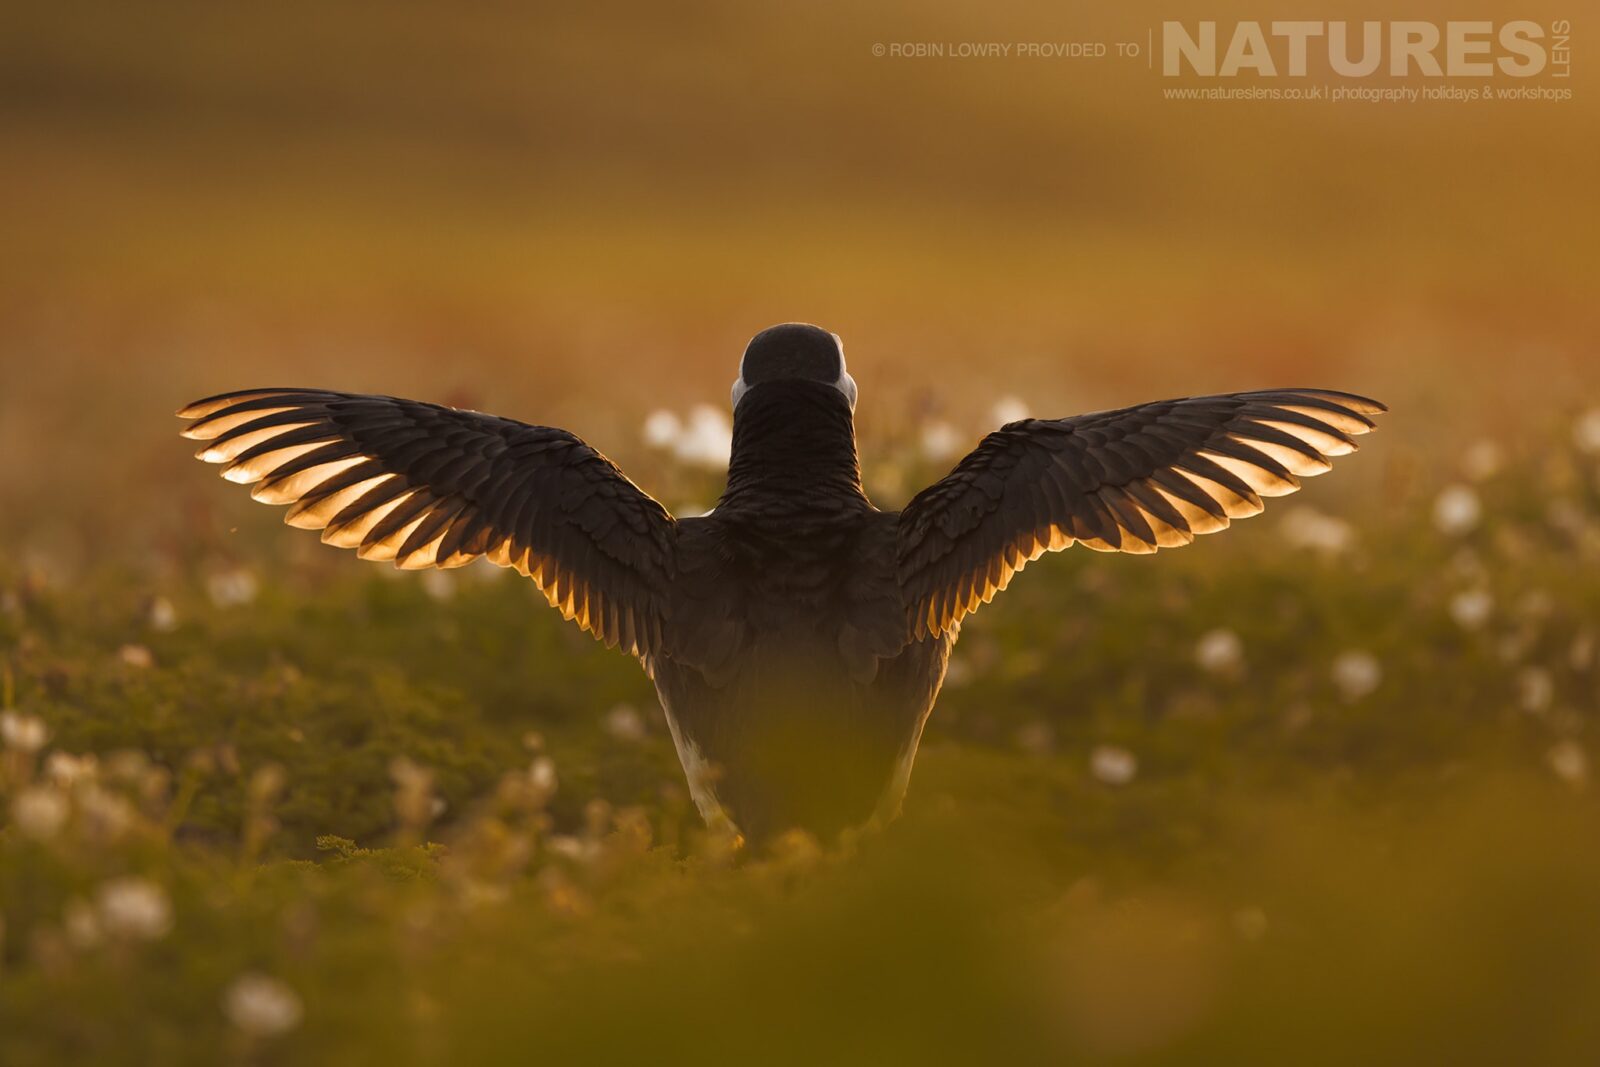 One Of The Puffins Of Skomer Stretches It'S Wings In The Evening Light This Image Was Captured During The Natureslens Comical Puffins Of Skomer Island Photography Holiday